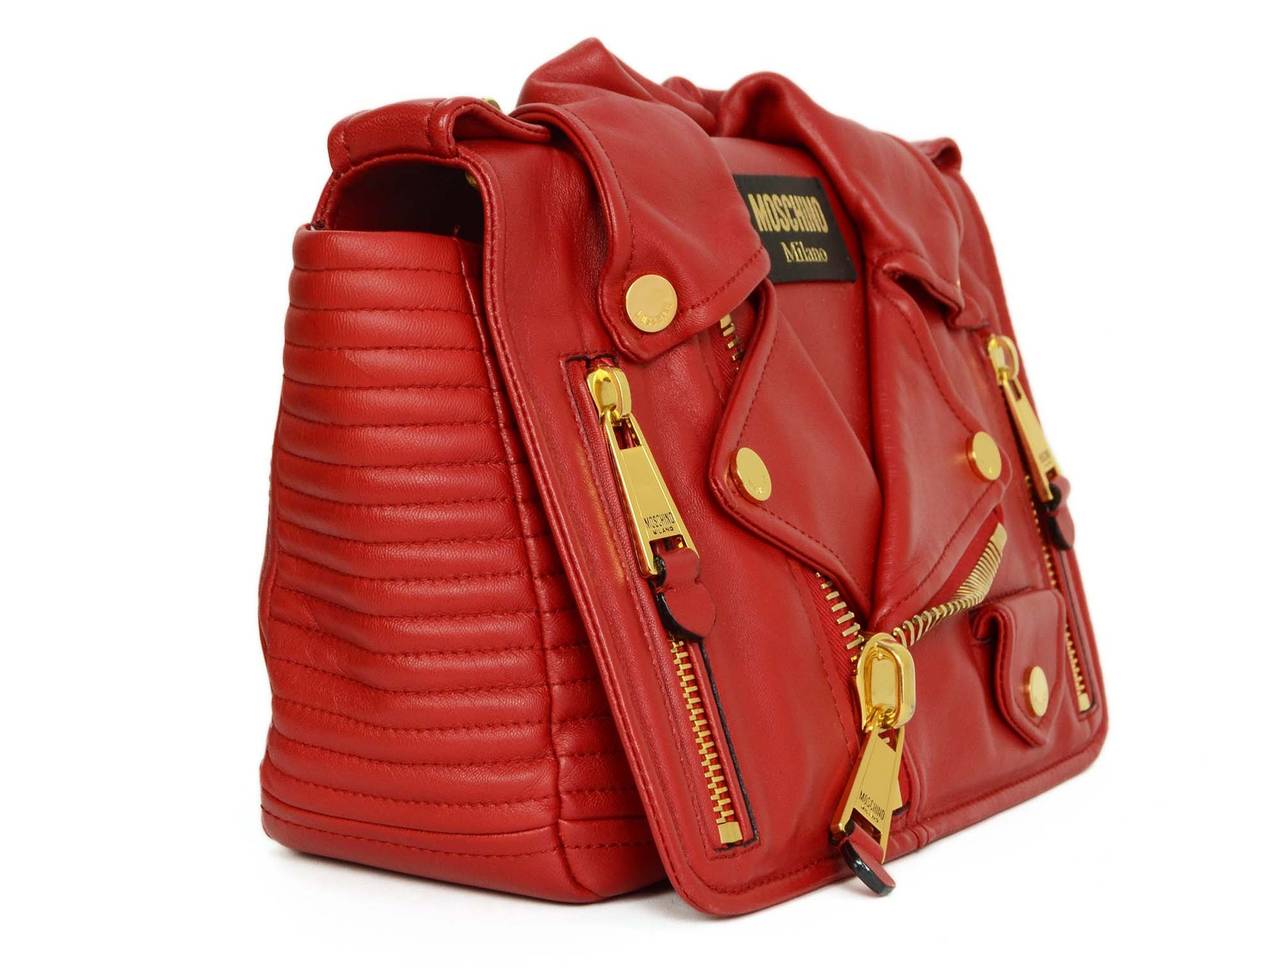 Moschino Red Leather Motorcycle Jacket Bag
Features all of the details that would go on a motorcycle jacket including buttons, zippers and a collar
Color: Red and goldtone
Hardware: Goldtone
Materials: Leather and metal
Lining: Black Moschino